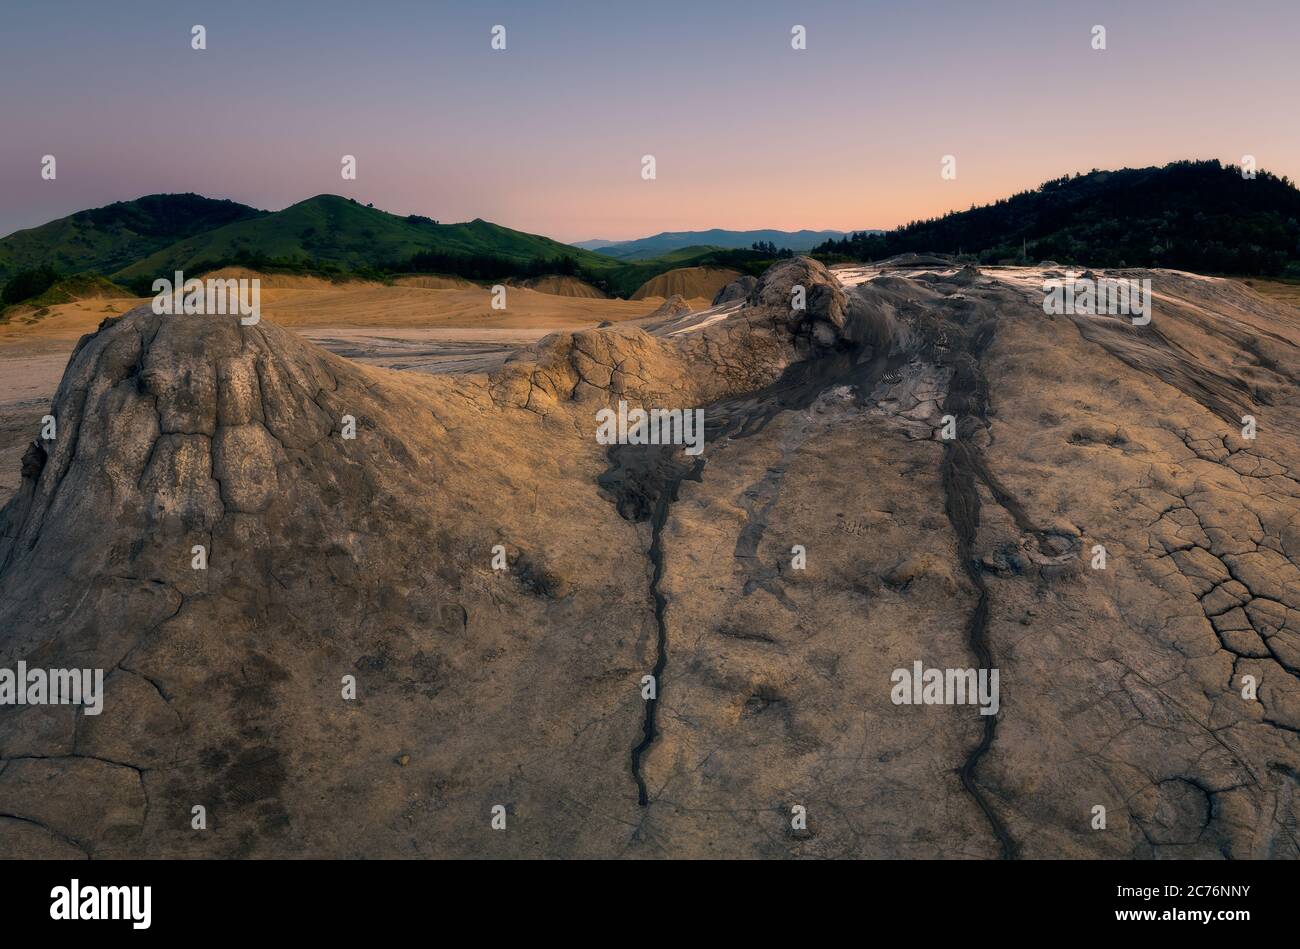 Panorama shot of some of the craters at Muddy Volcanoes in Romania, Buzau County with the mountains in the background against a clear sky Stock Photo